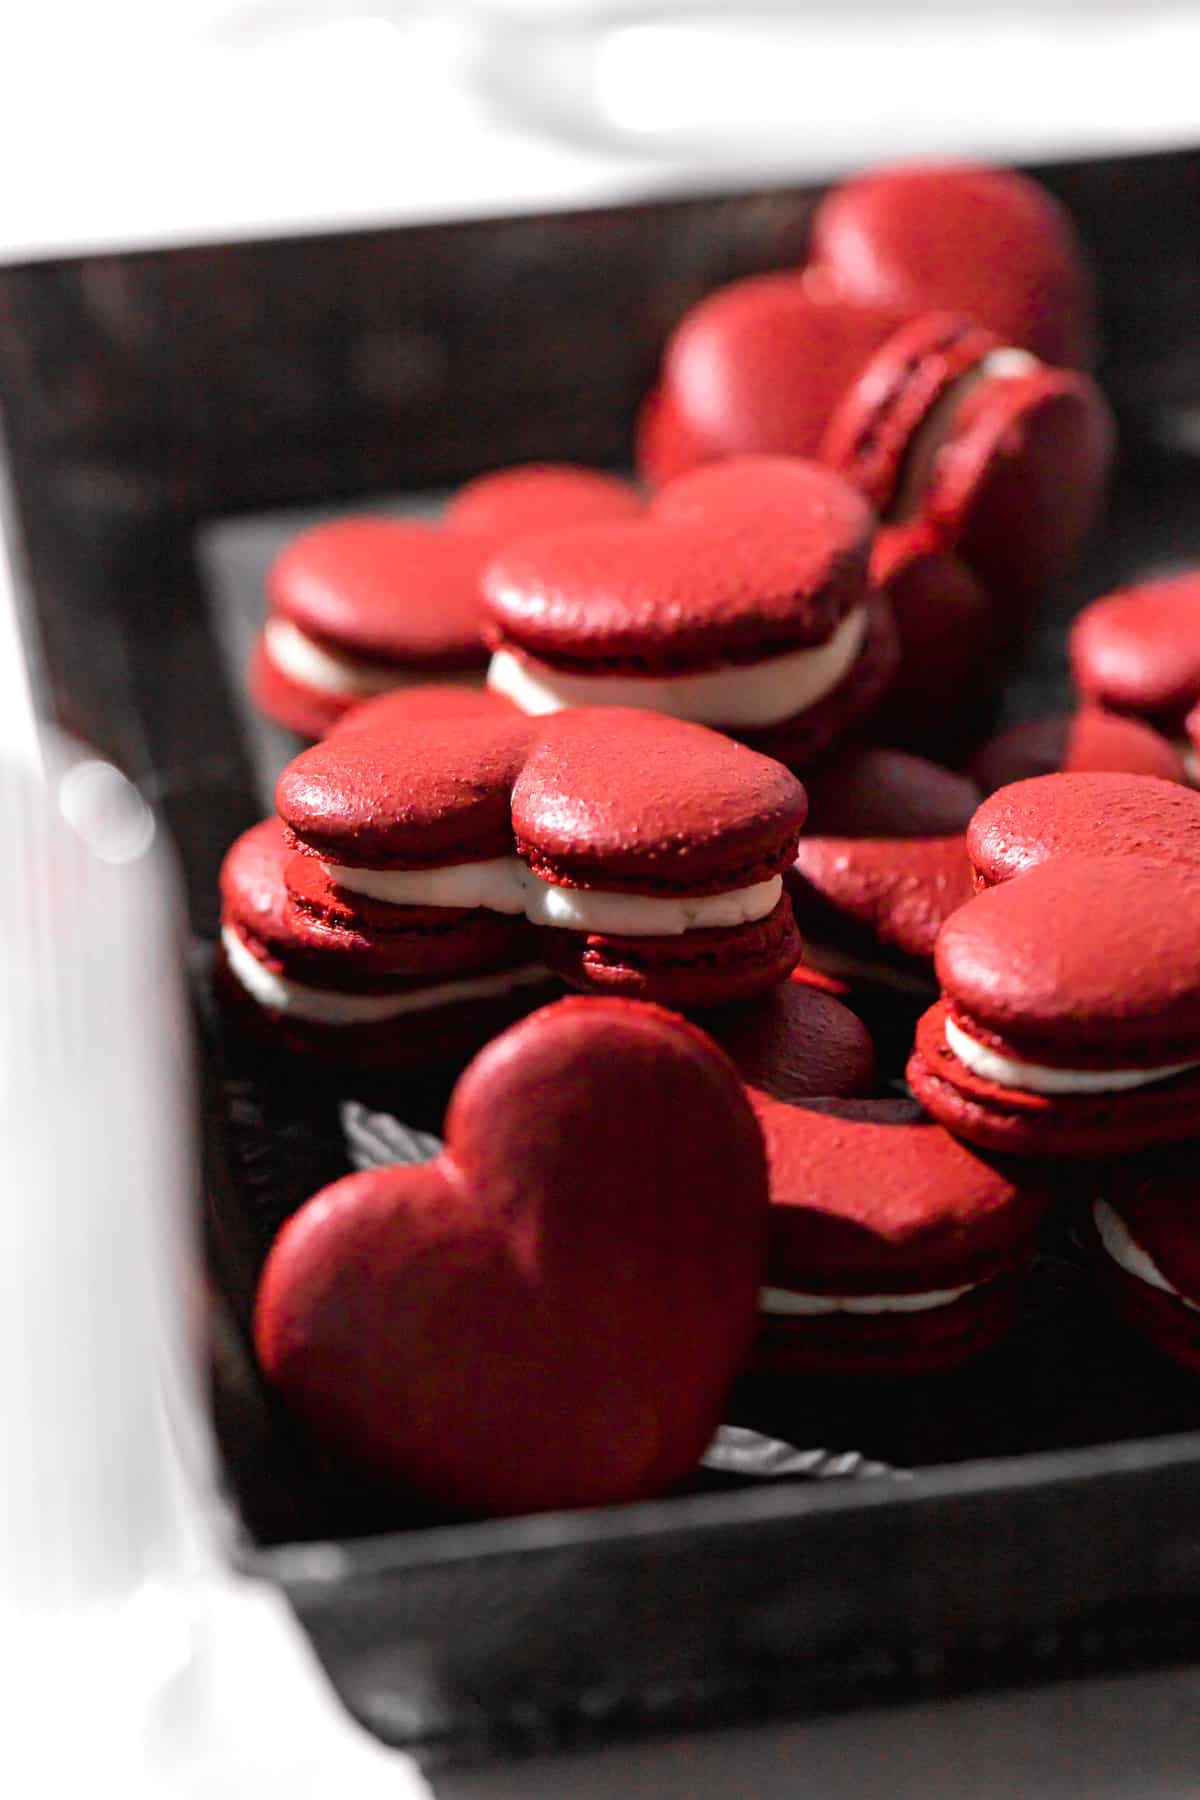 red velvet macarons piled in tray with wine glass in foreground.